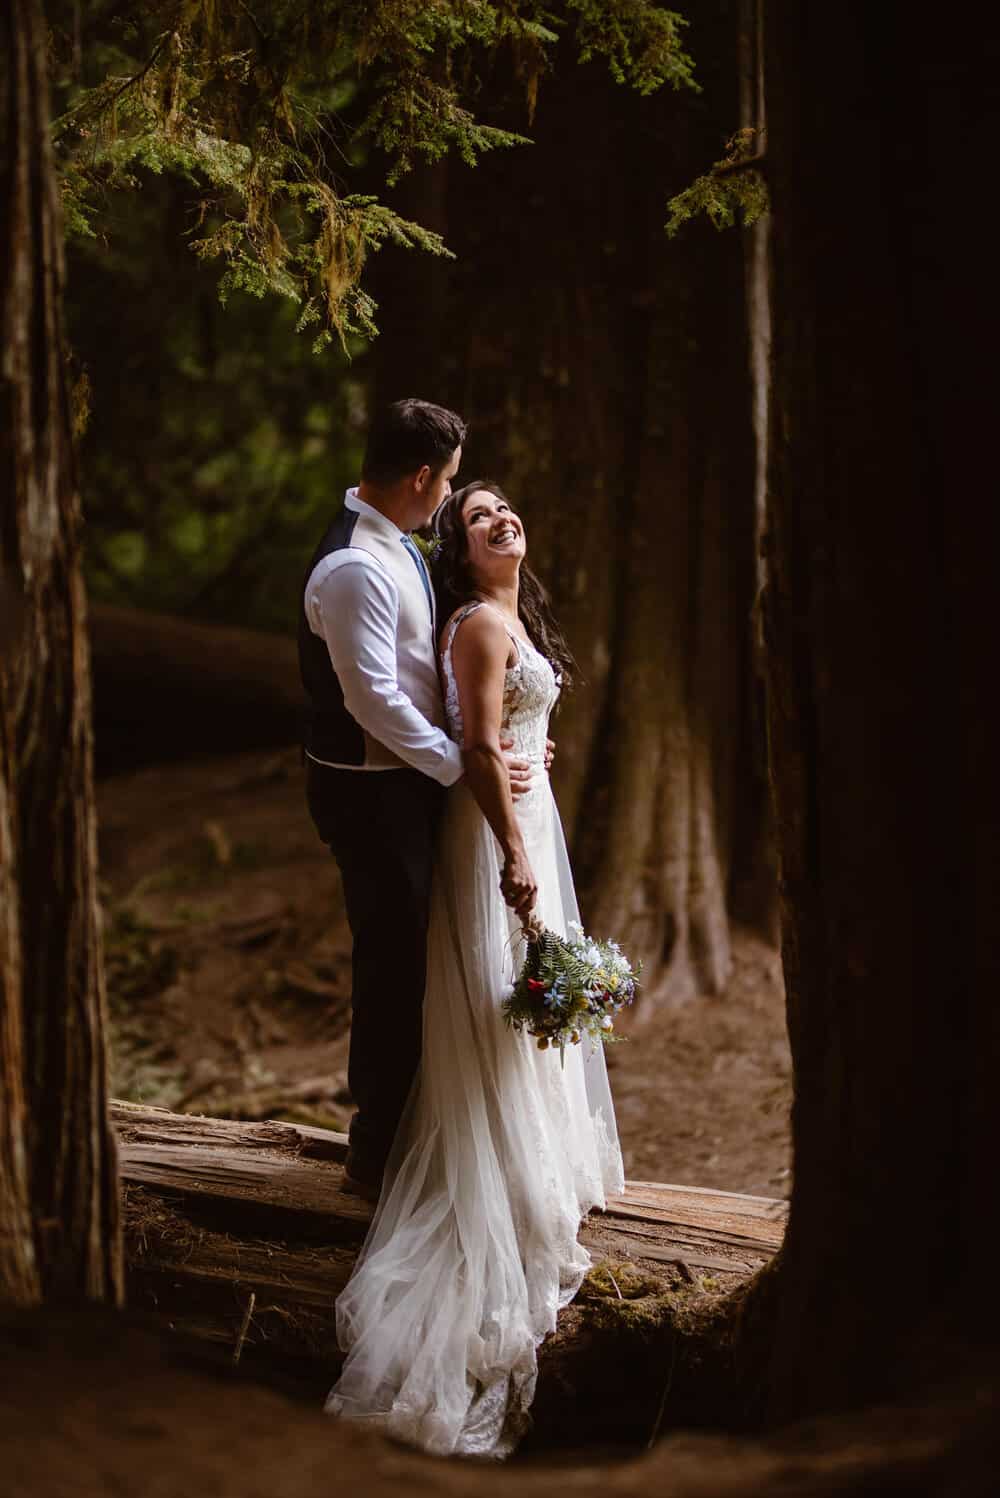 A bride smiles at her groom as they stand together in a forest. 